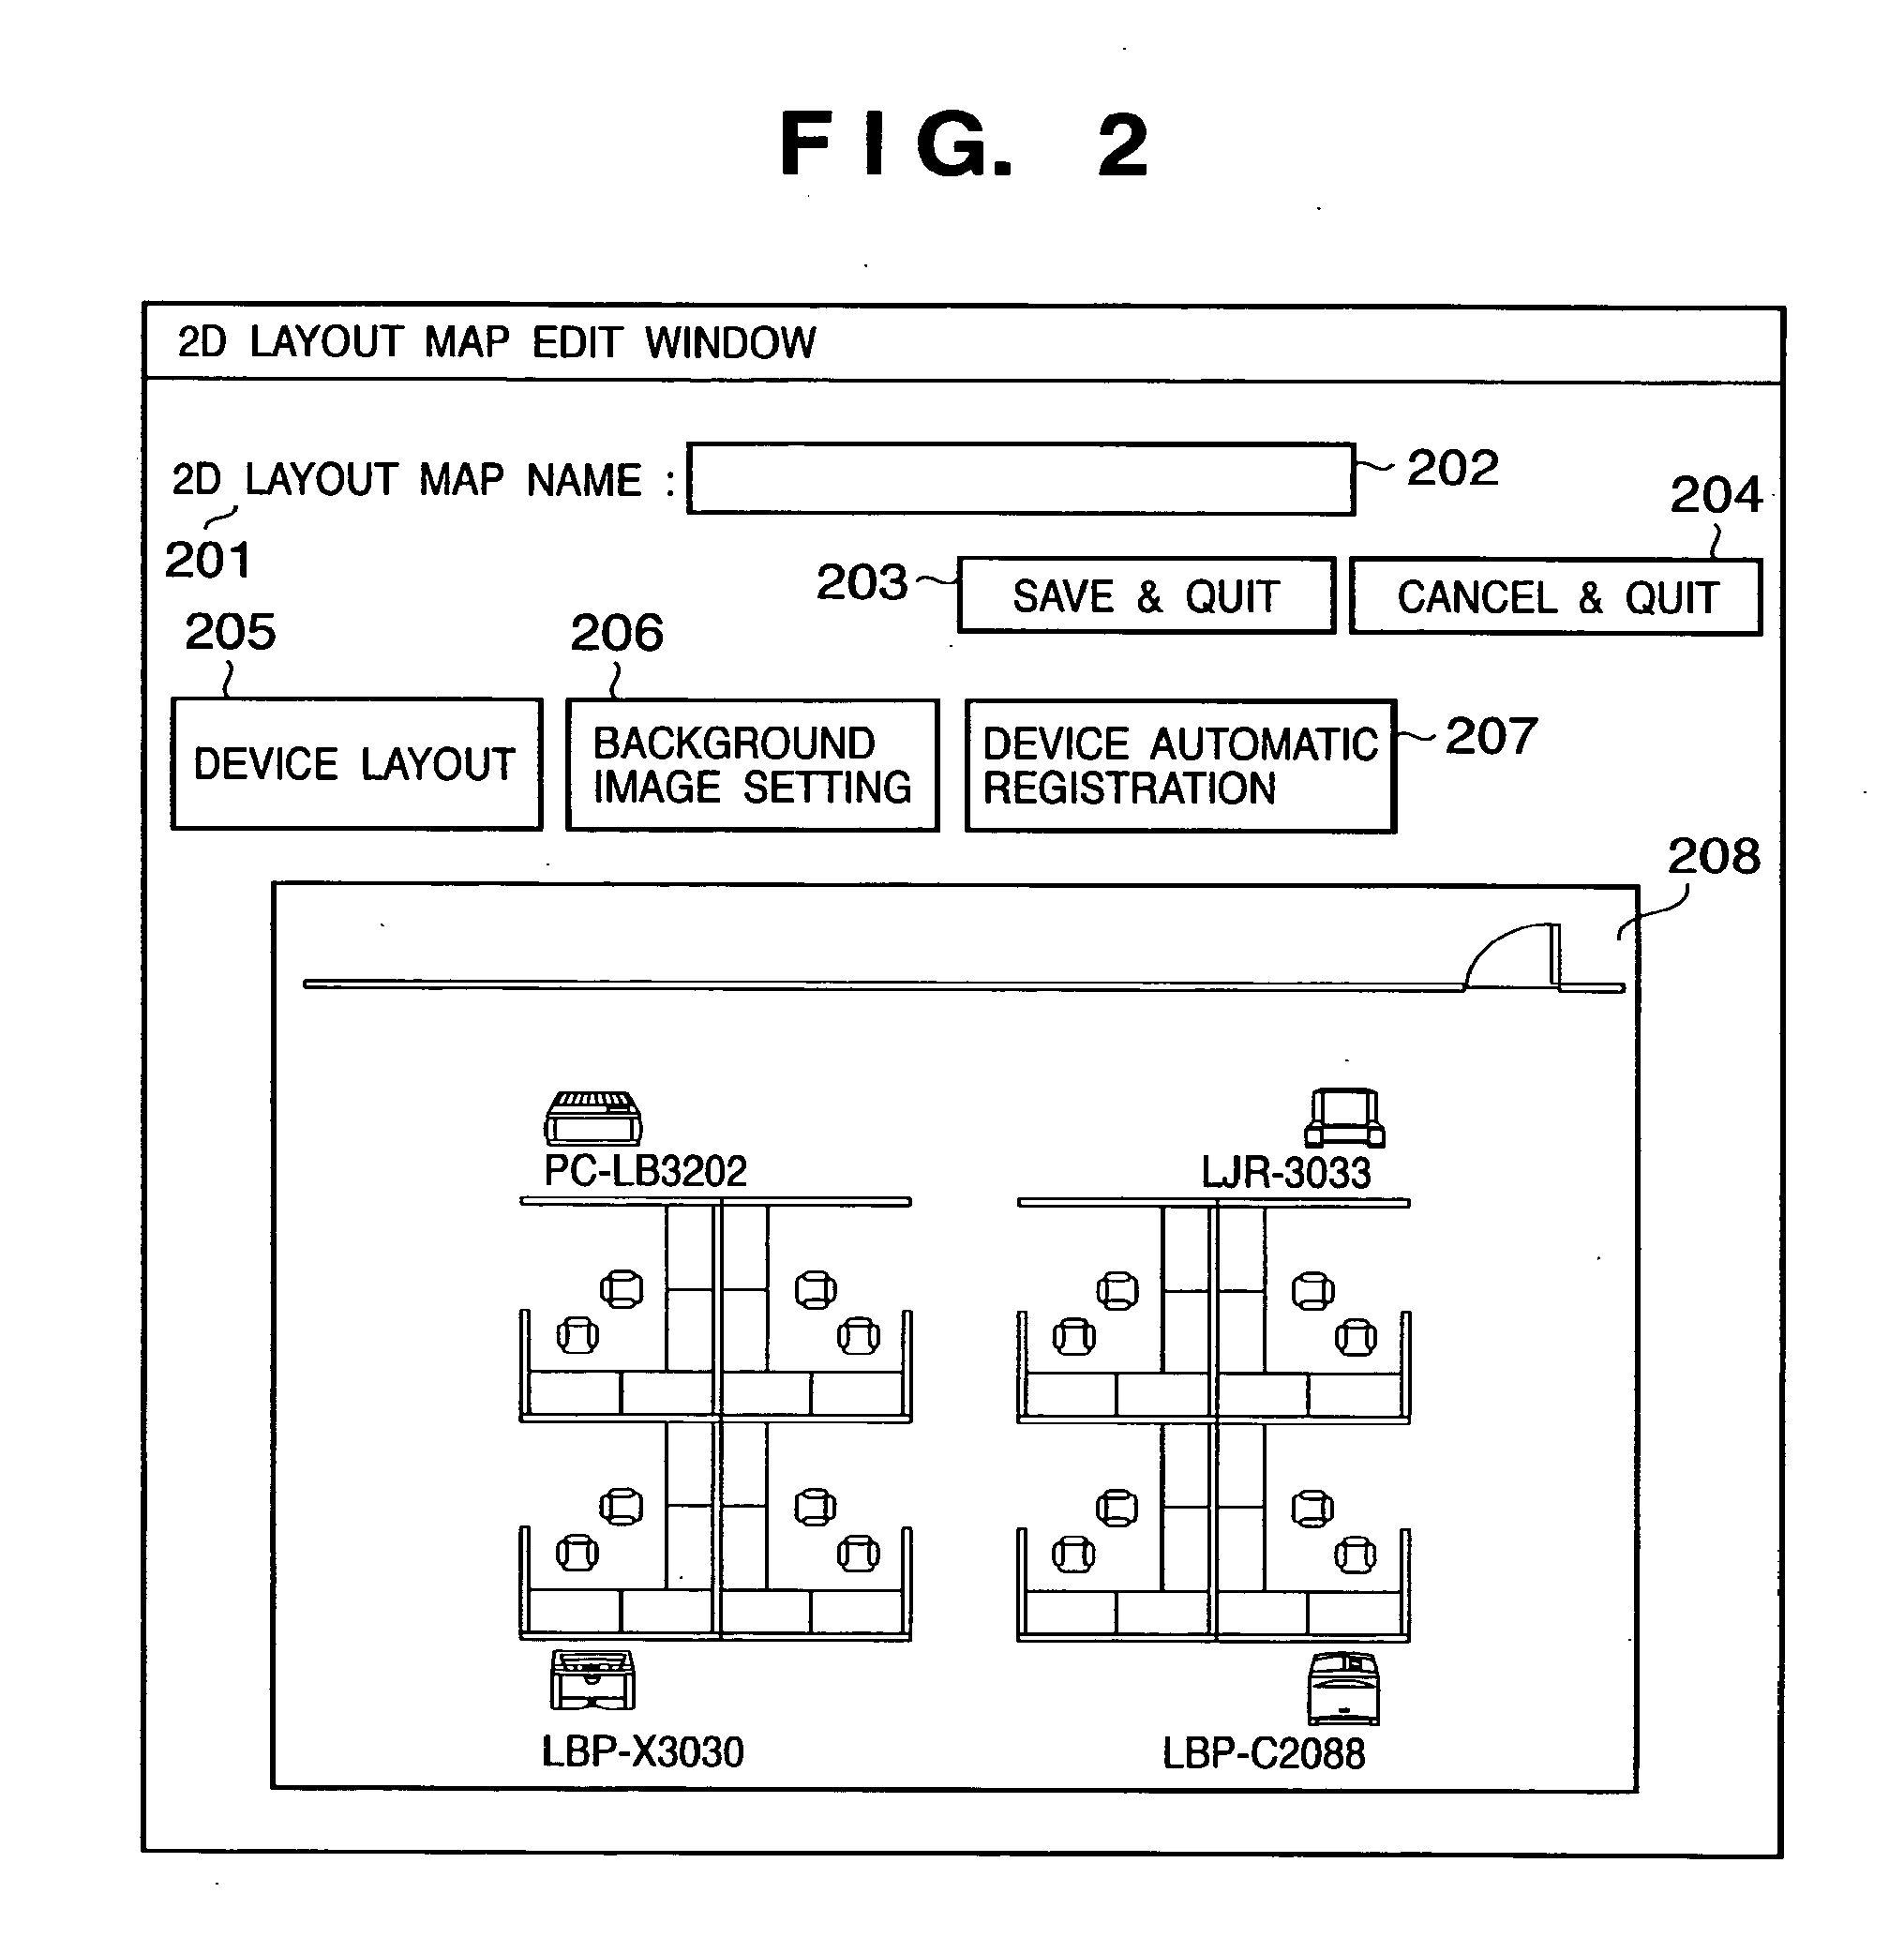 Device management apparatus and method